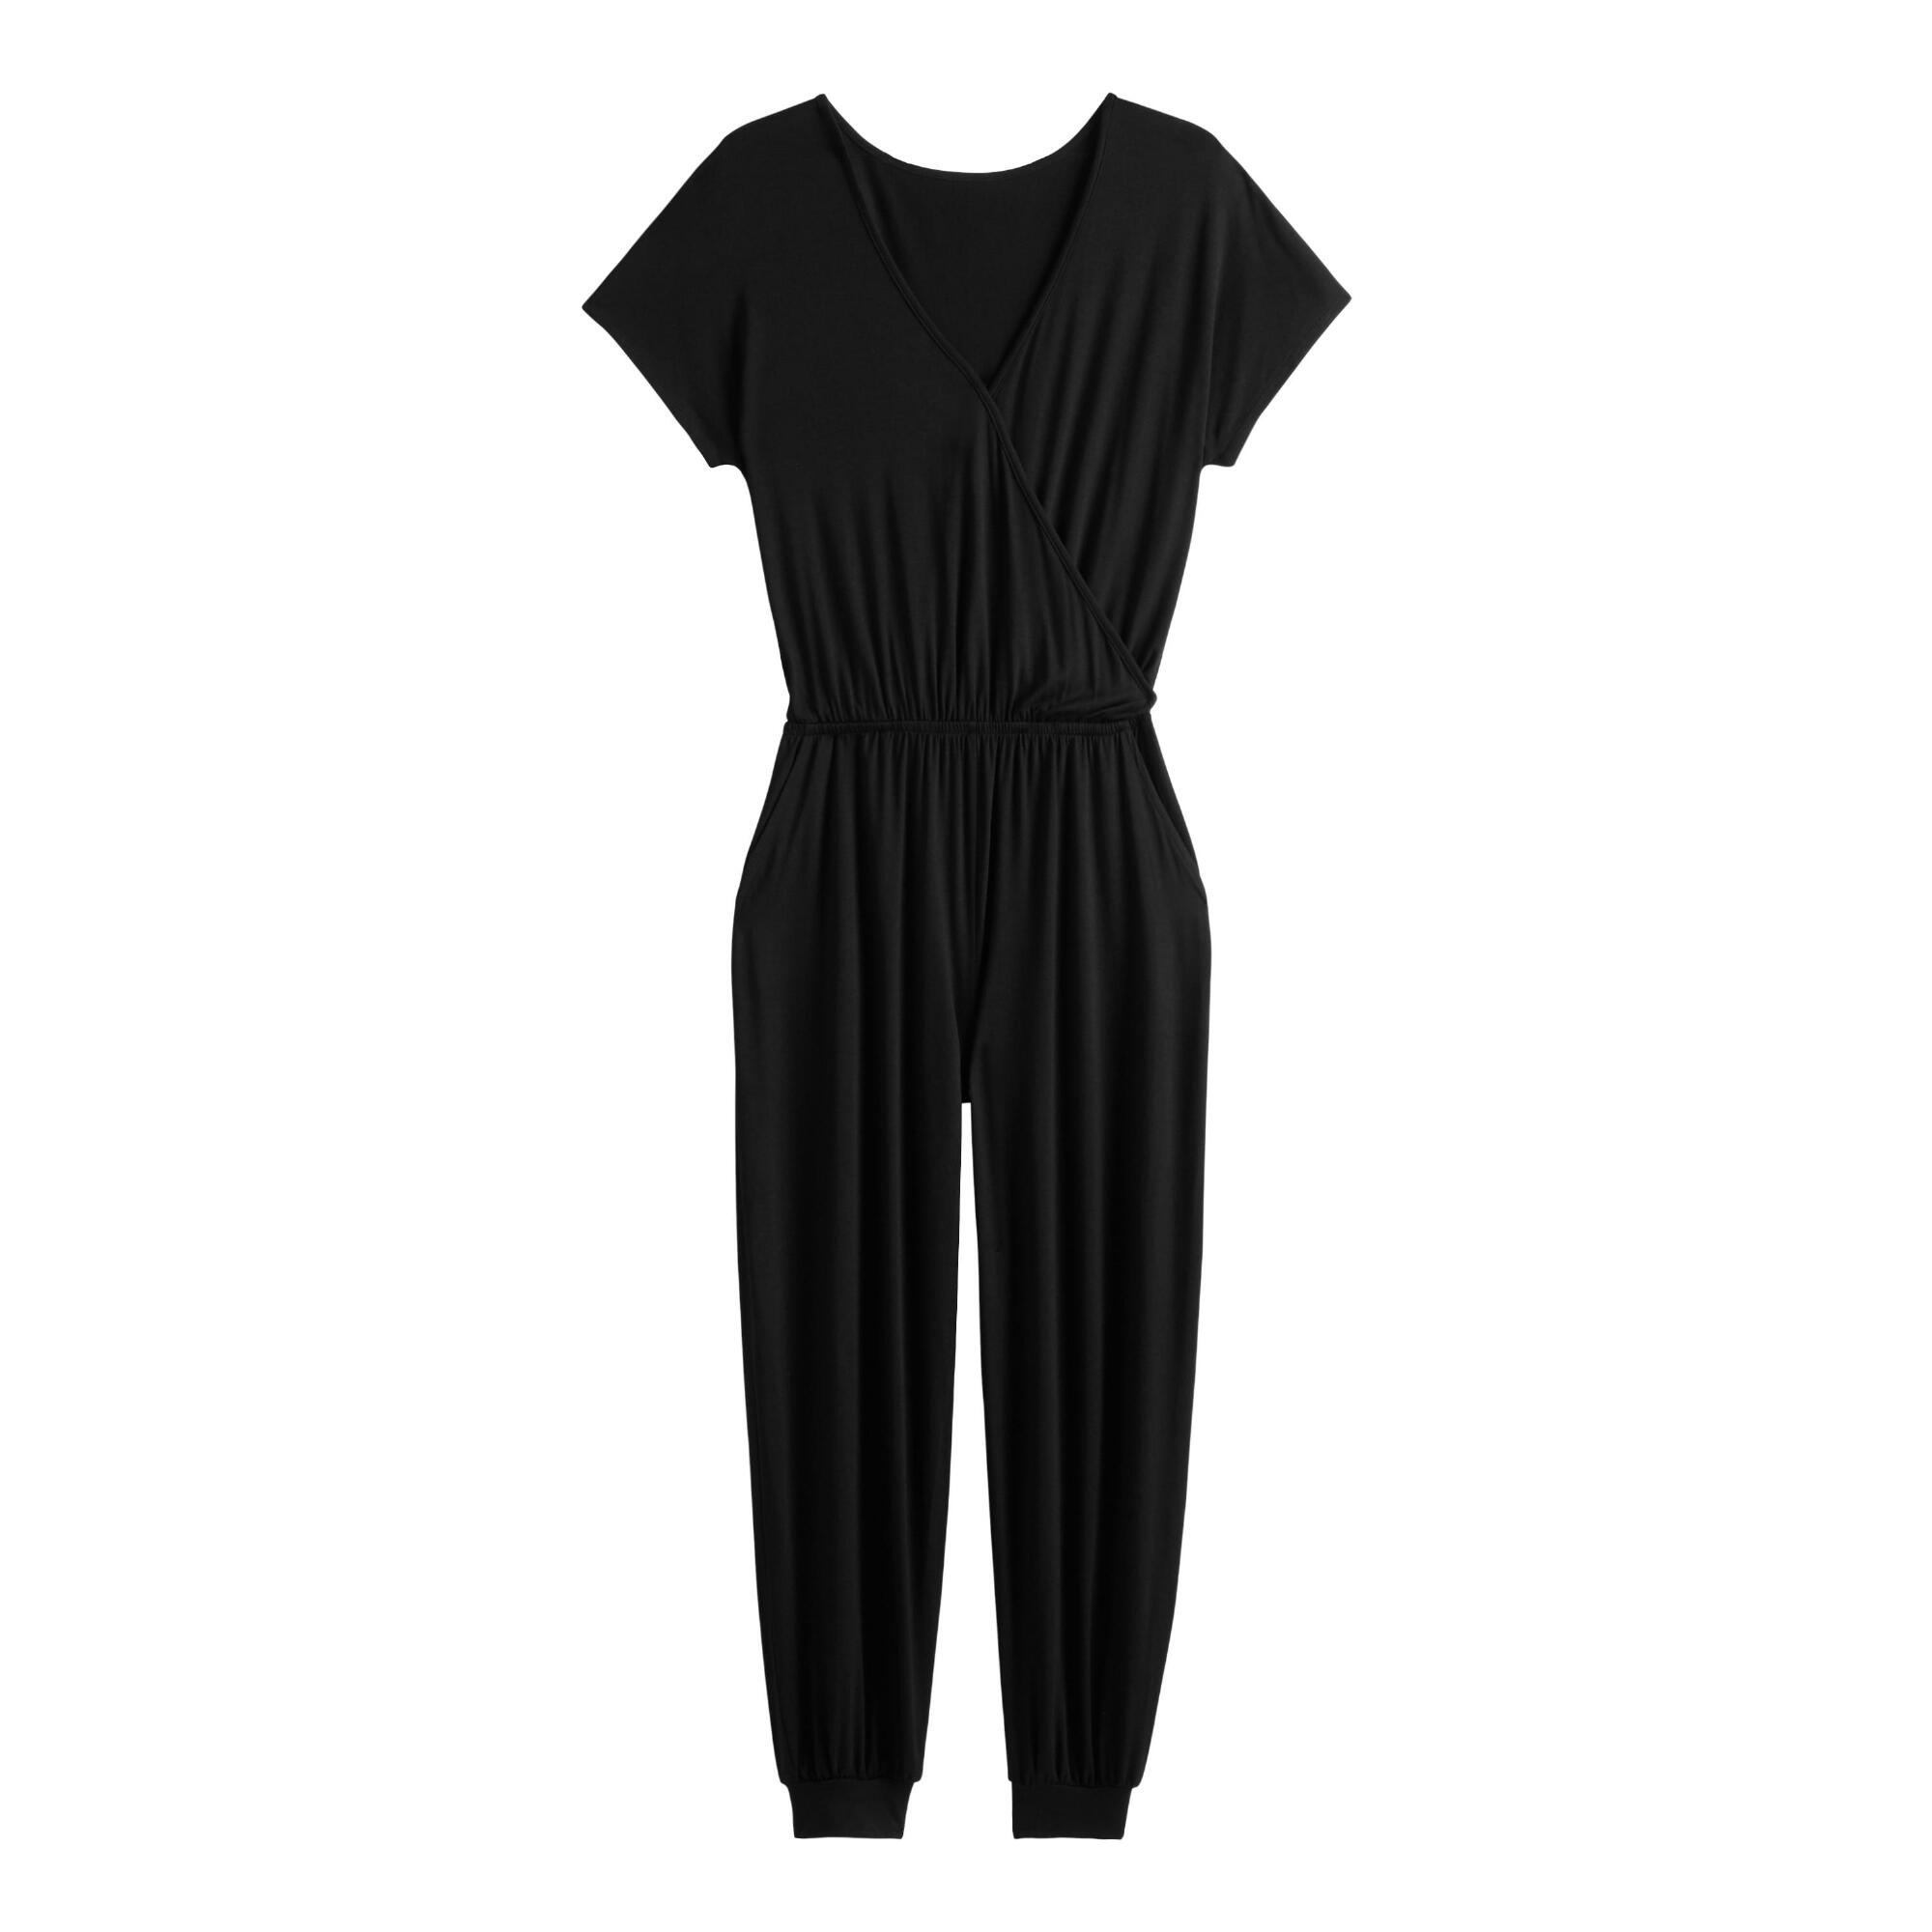 Black Knit Lounge Jumpsuit With Pockets - Small by World Market